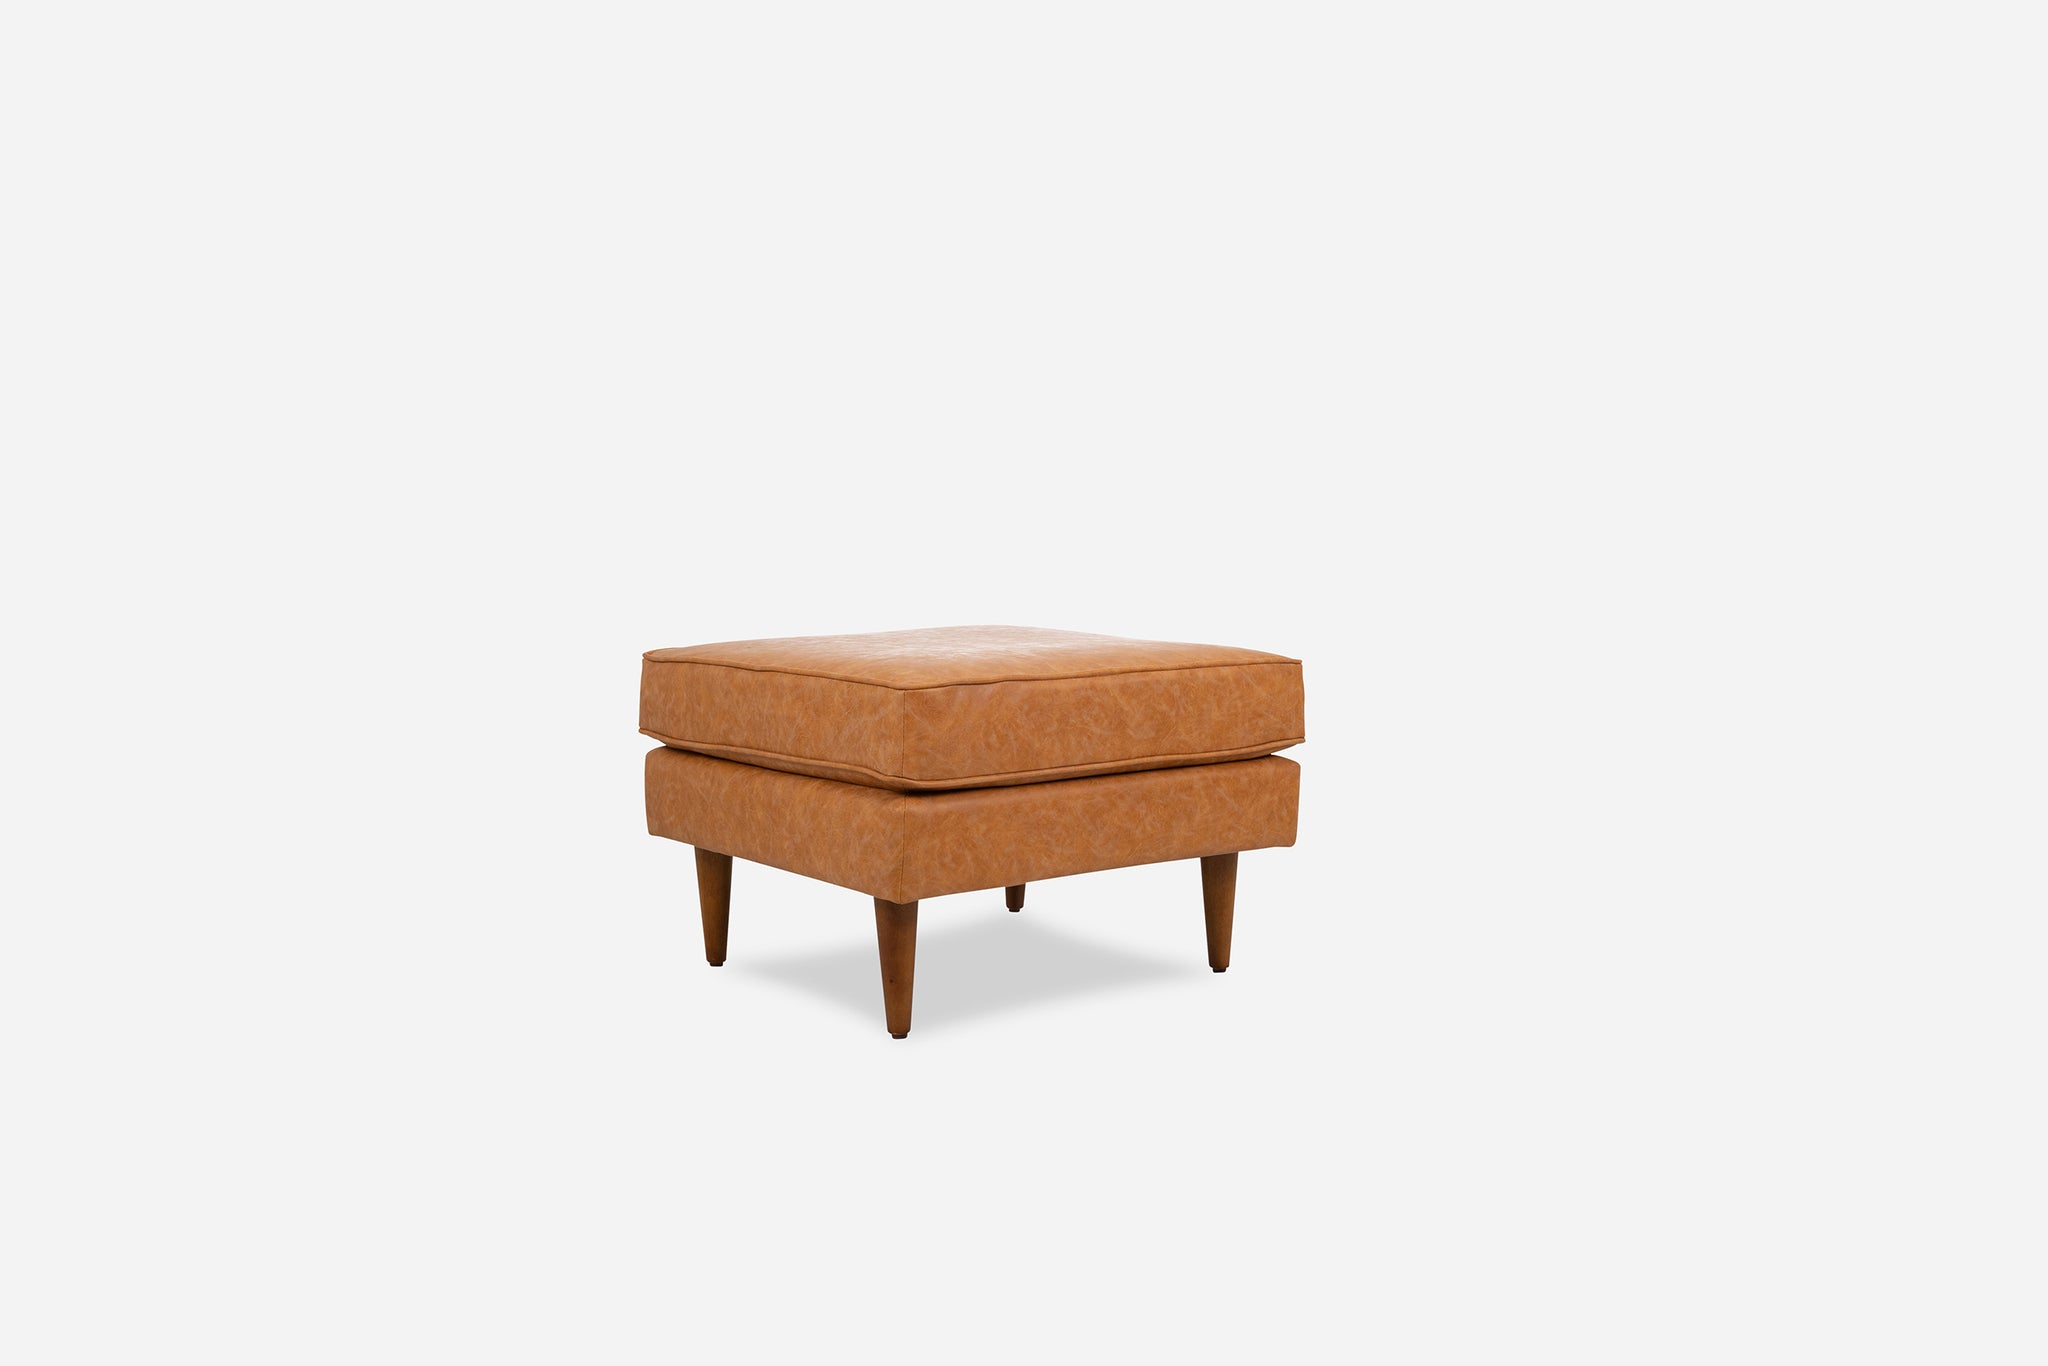 albany ottoman shown in distressed vegan leather with walnut legs